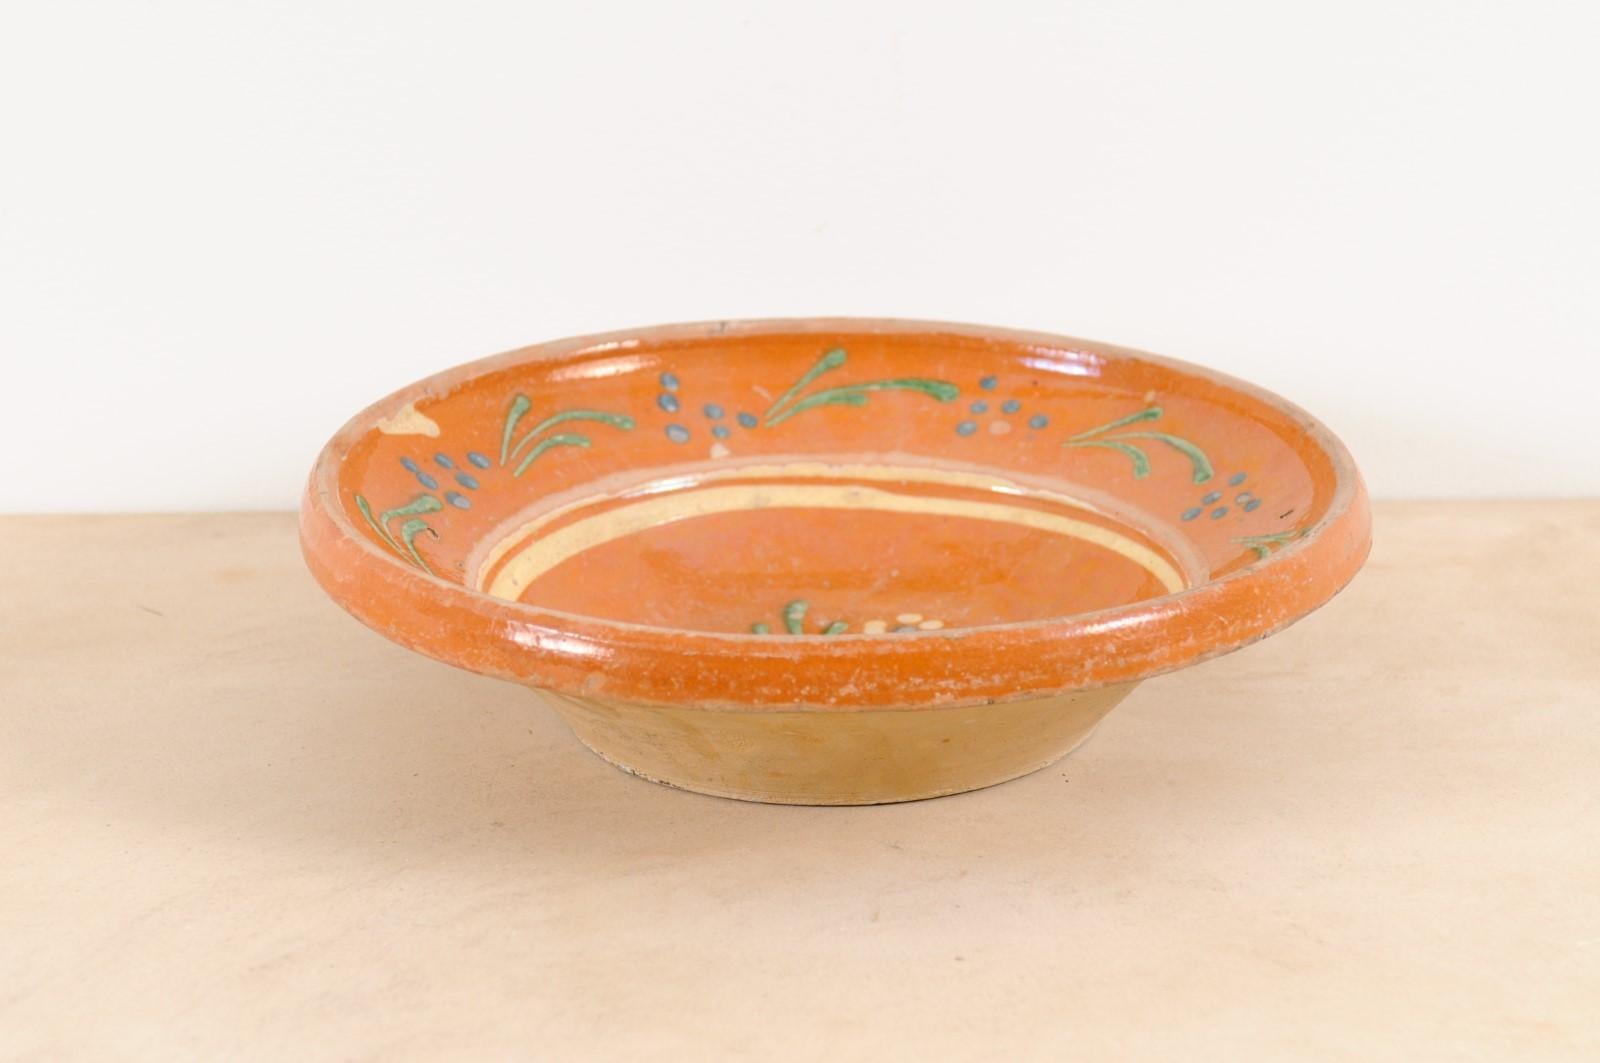 A French jaspe pottery bowl from the 19th century, with russet ground and floral motifs. Charming us with its earthy ground adorned with blue and green floral accents, this French 19th century jaspe pottery bowl will bring an unpretentious presence